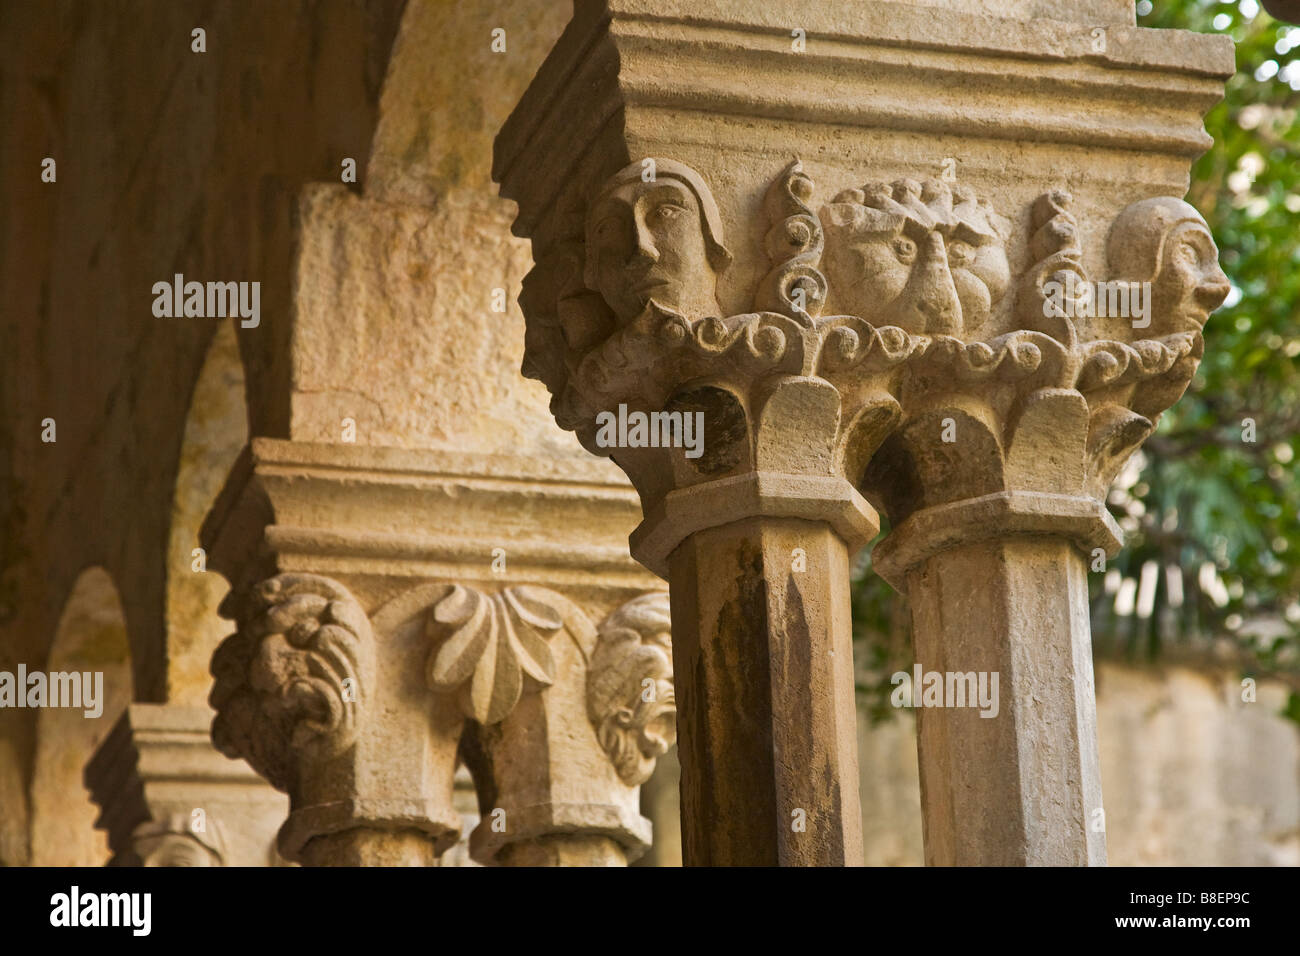 Carved capitals of Franciscan monastery cloisters and courtyard Dubrovnik Dalmatia Croatia Europe Stock Photo